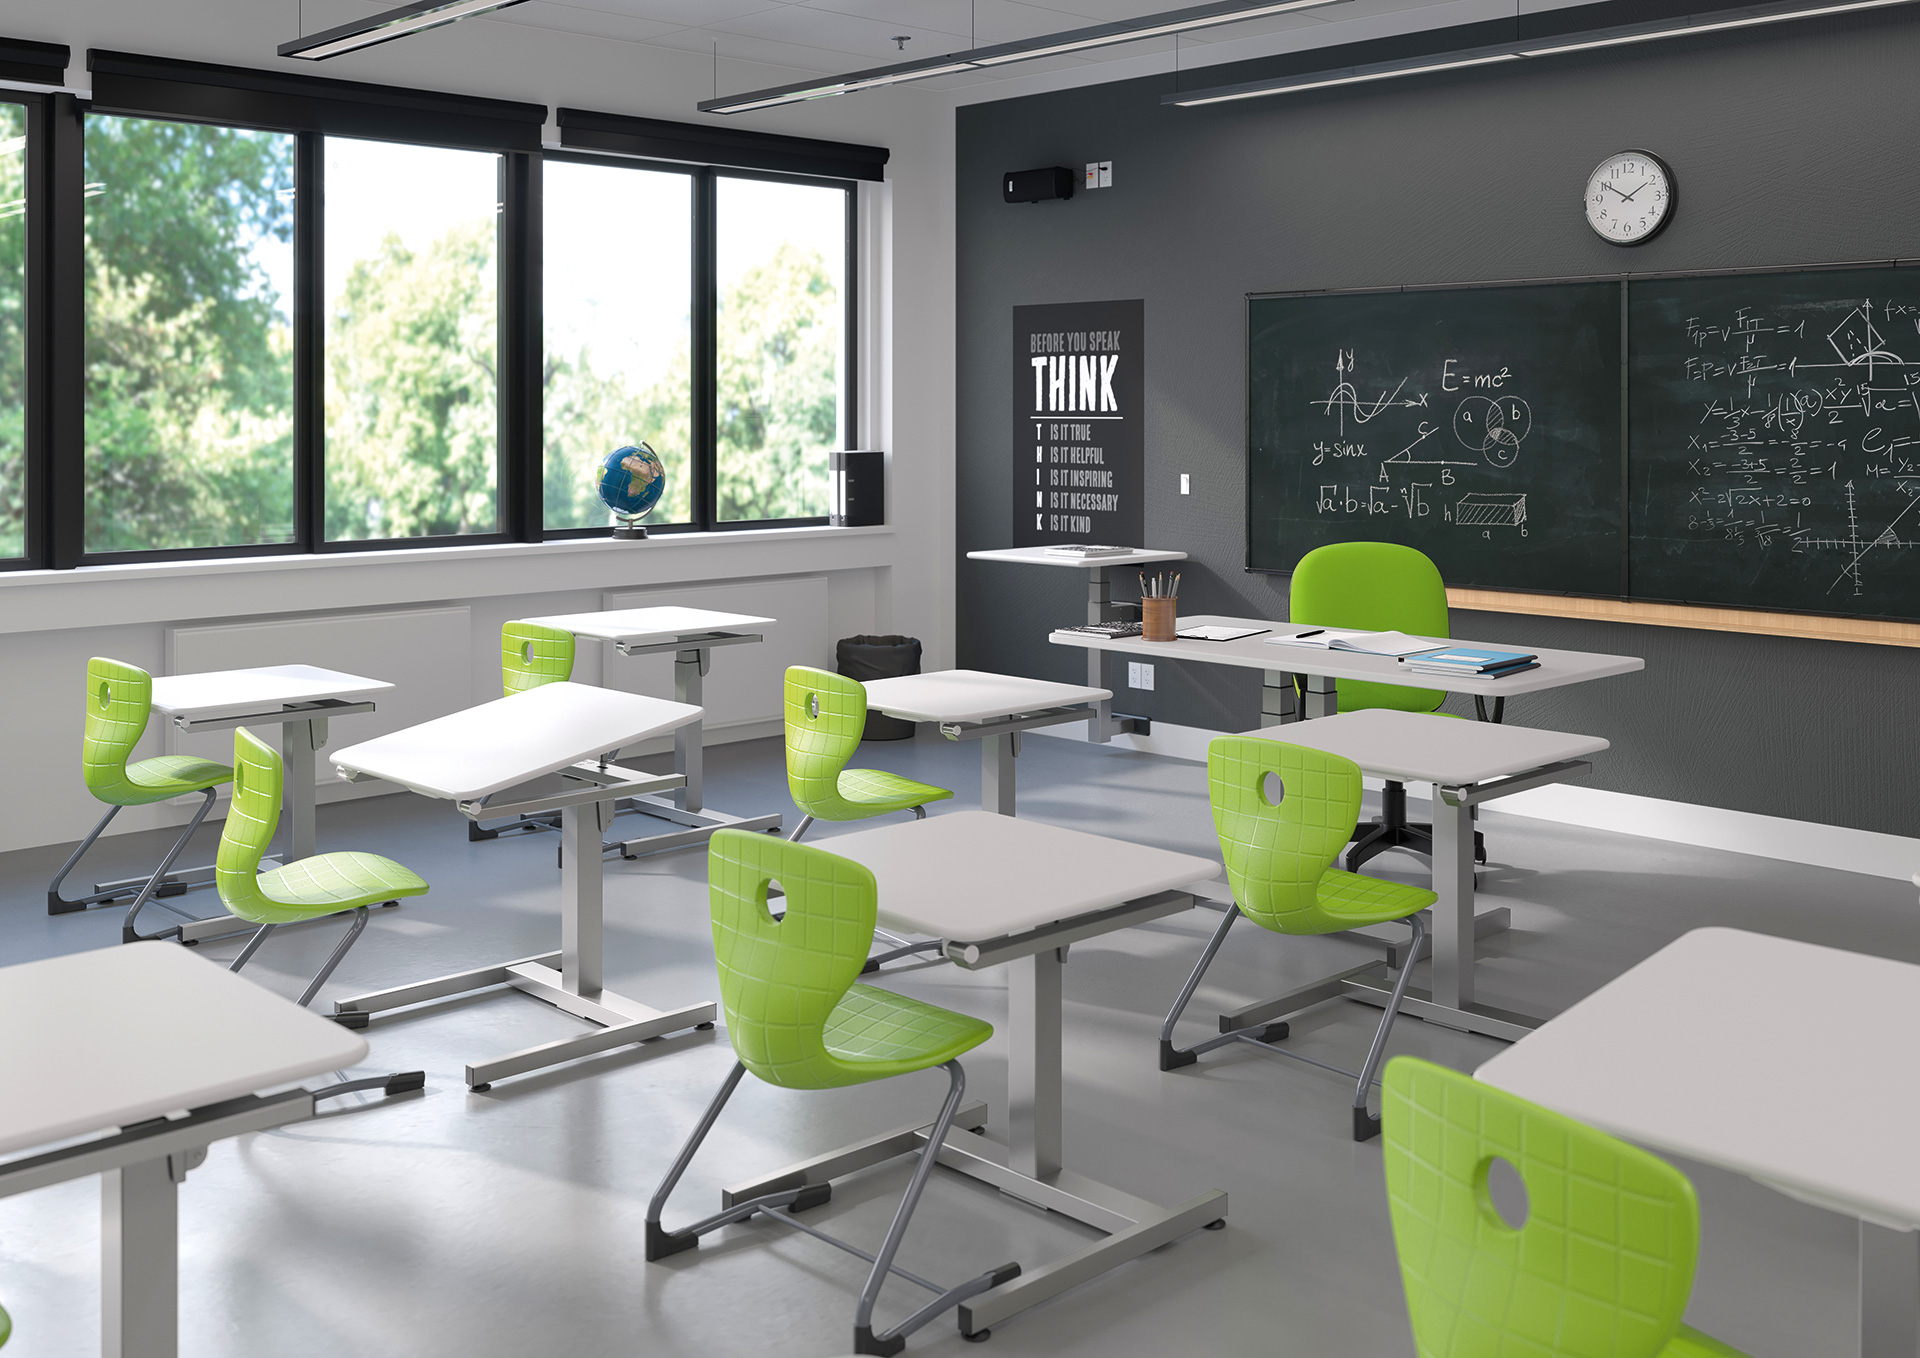 Educational Spaces Need Adaptability in Classroom Furniture